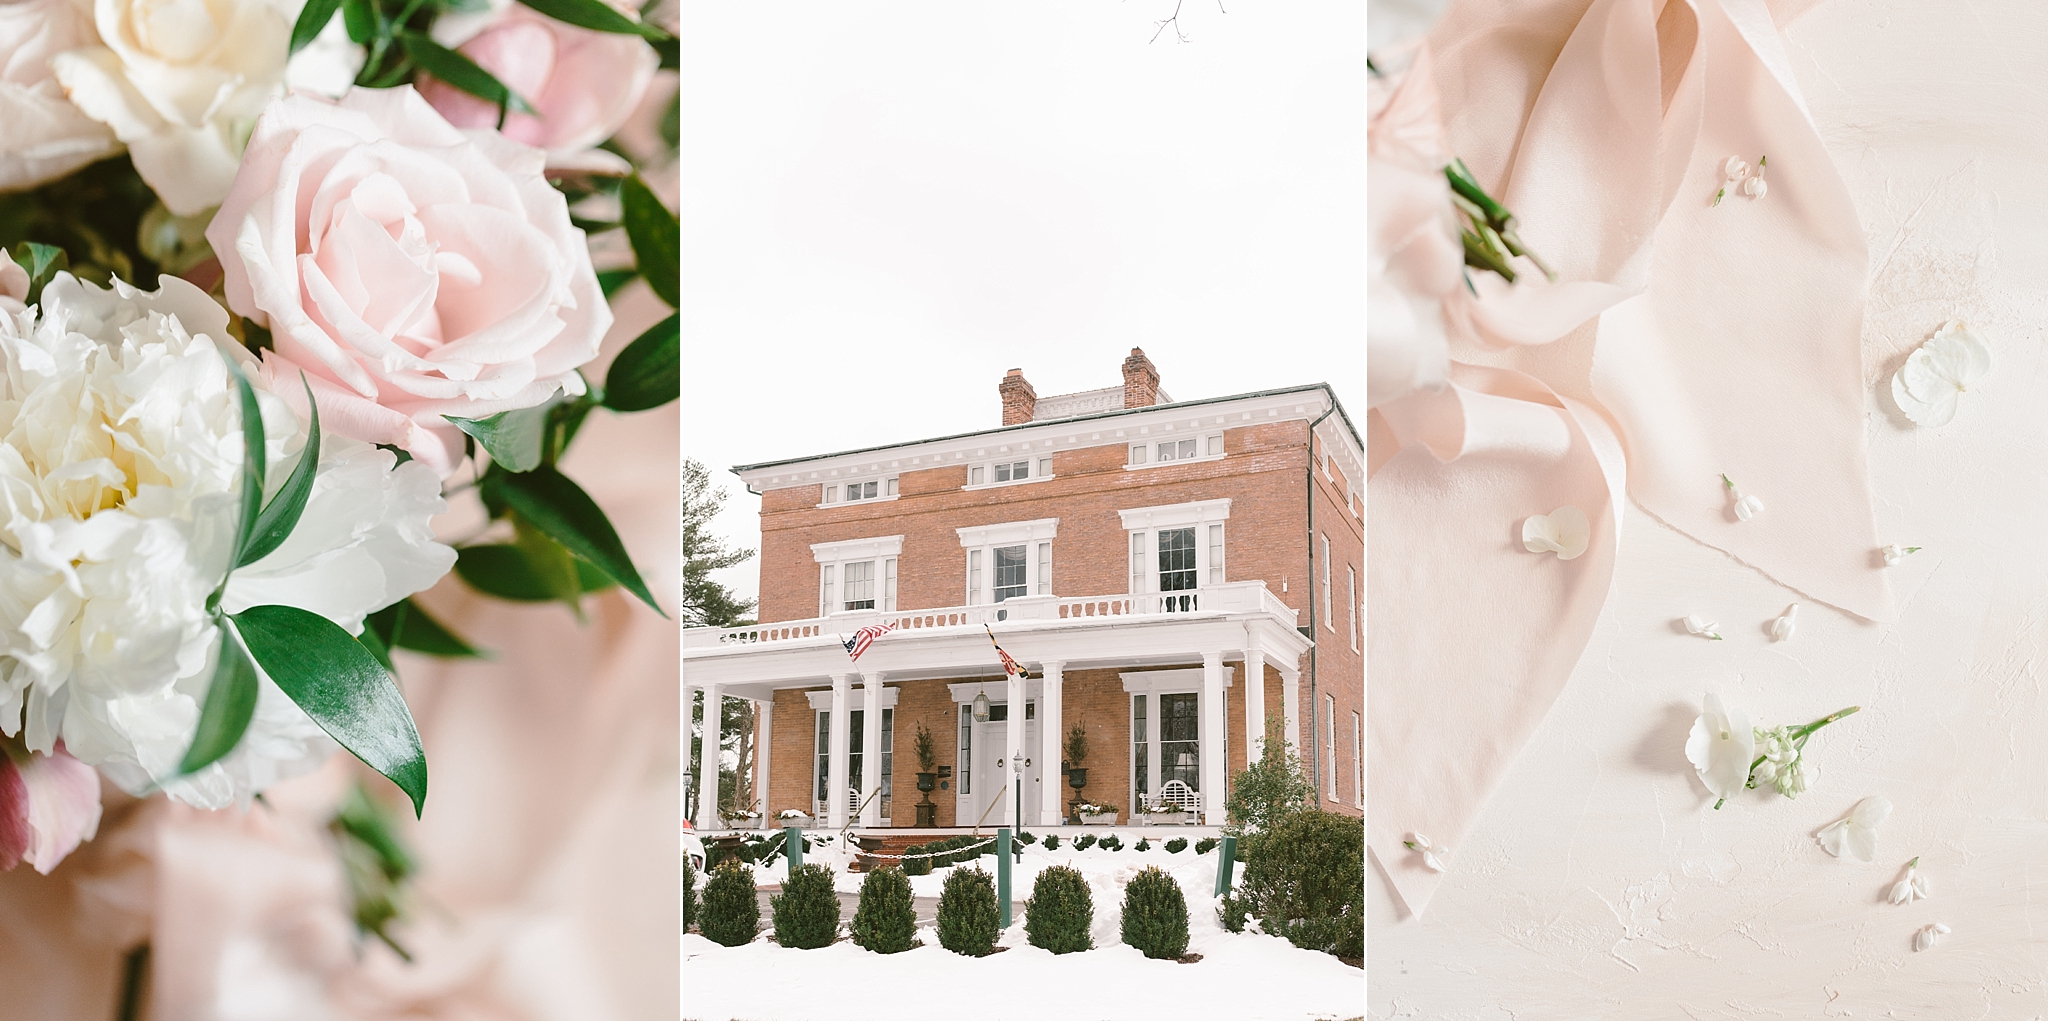 This romantic English garden wedding at Antrim 1844 in Taneytown, MD was planned by Eastmade Events and photographed by DC photographer, Alicia Lacey.